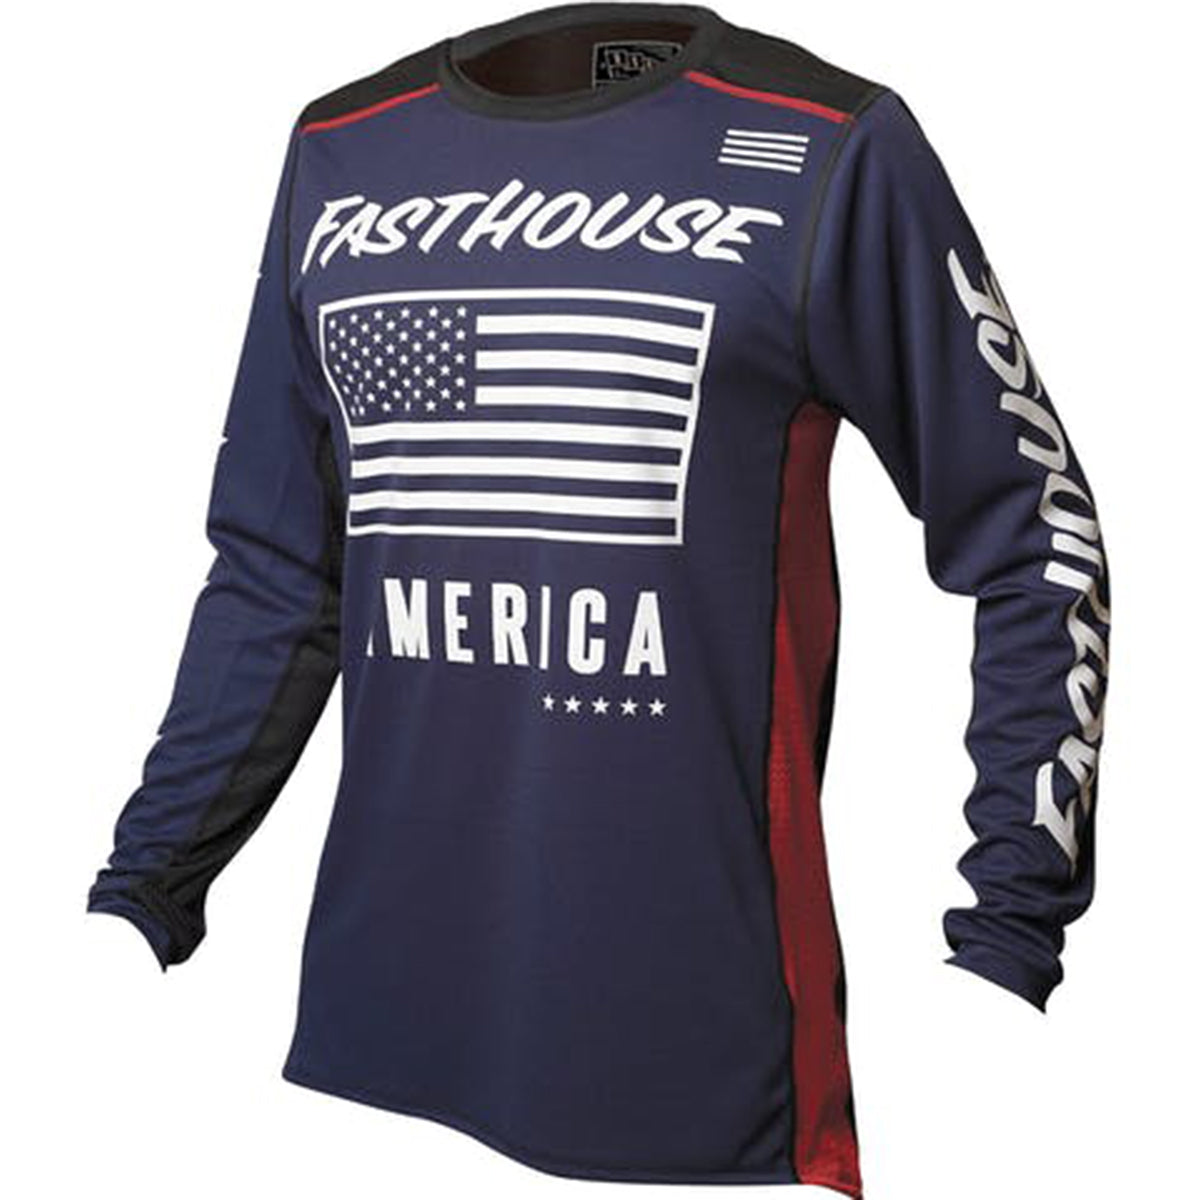 Fasthouse Grindhouse American LS Men's Off-Road Jerseys-2762